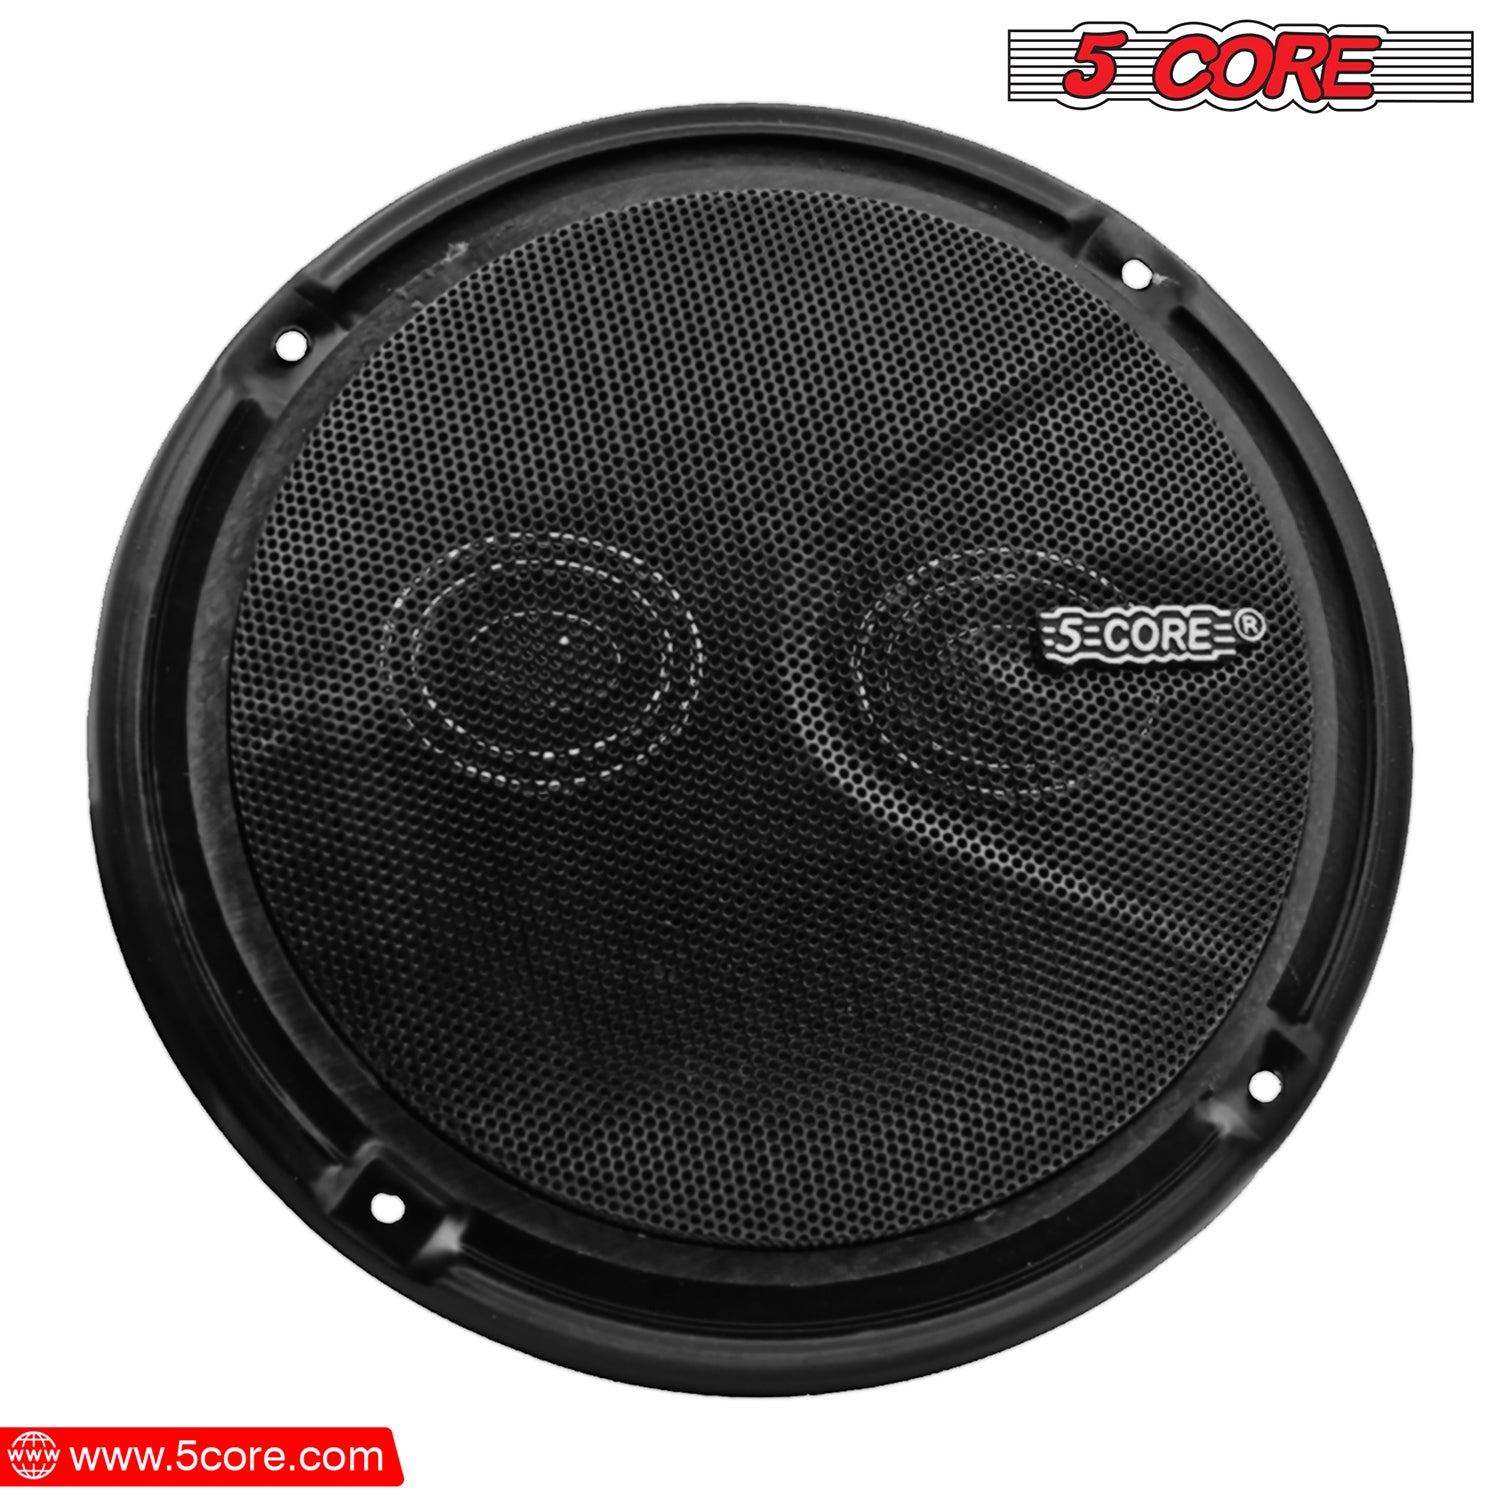 Upgrade Your Car Audio: 5 Core's 6-Inch Coaxial Speakers